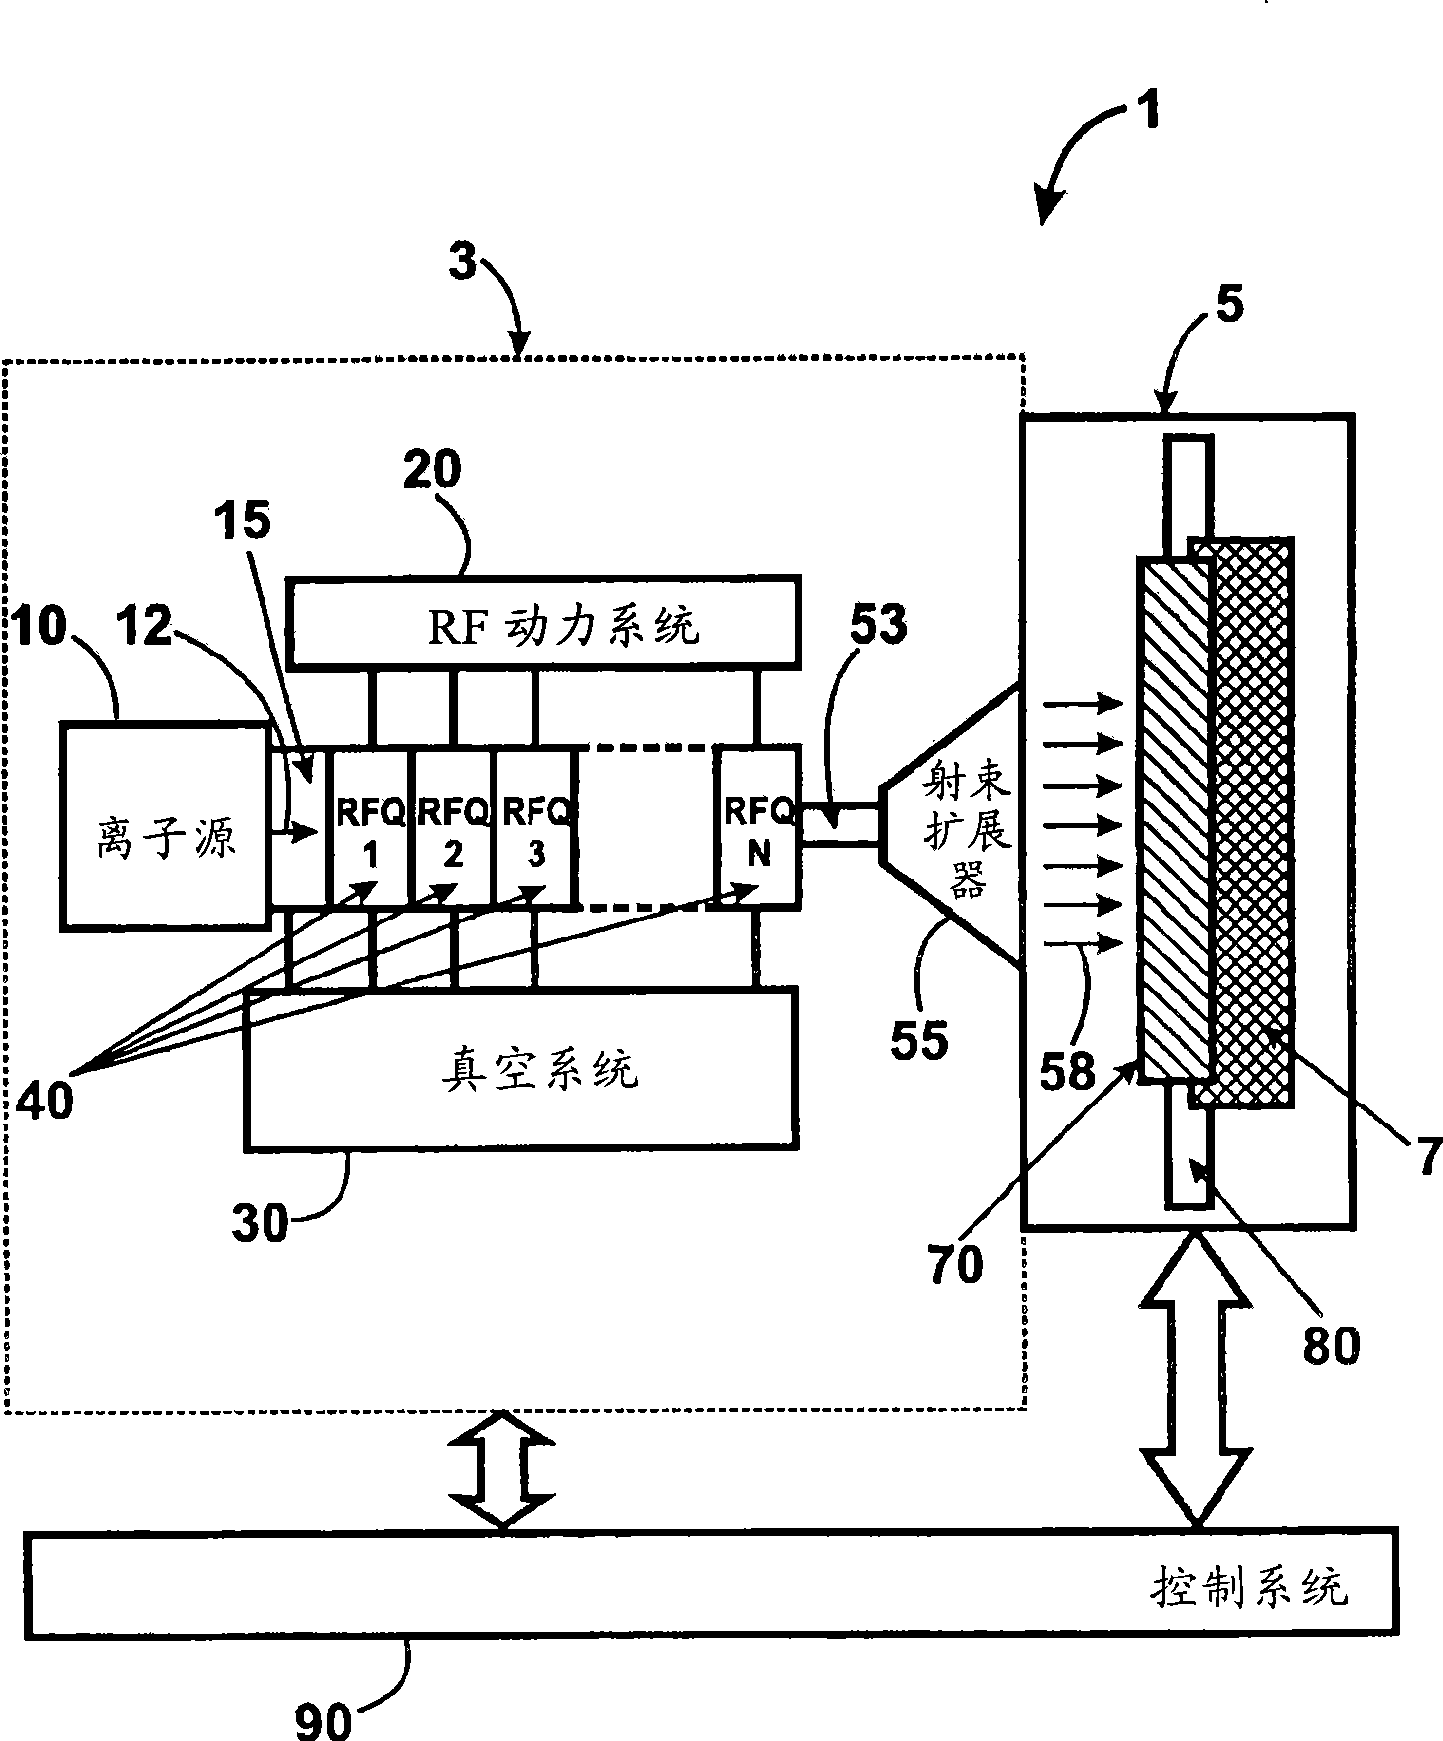 Apparatus and method for introducing particles using a radio frequency quadrupole linear accelerator for semiconductor materials